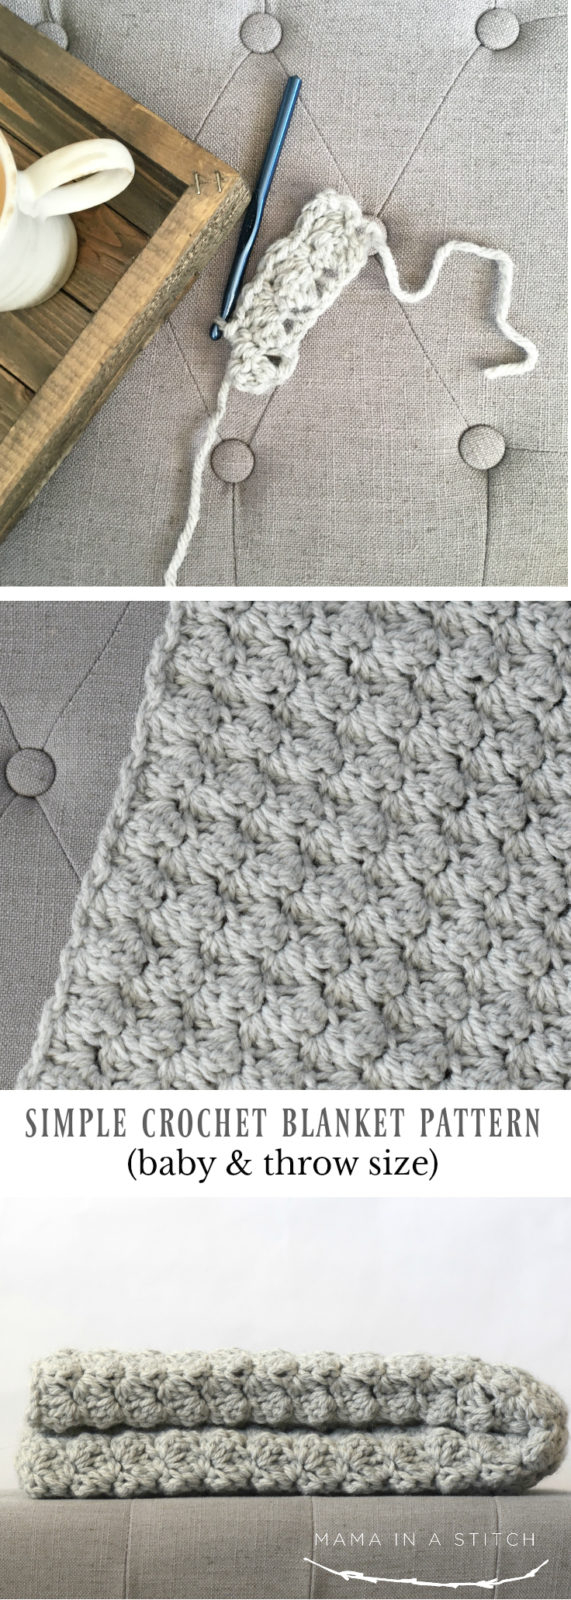 Easy Baby Crochet Blanket Pattern Simple Crocheted Blanket Go To Pattern Mama In A Stitch